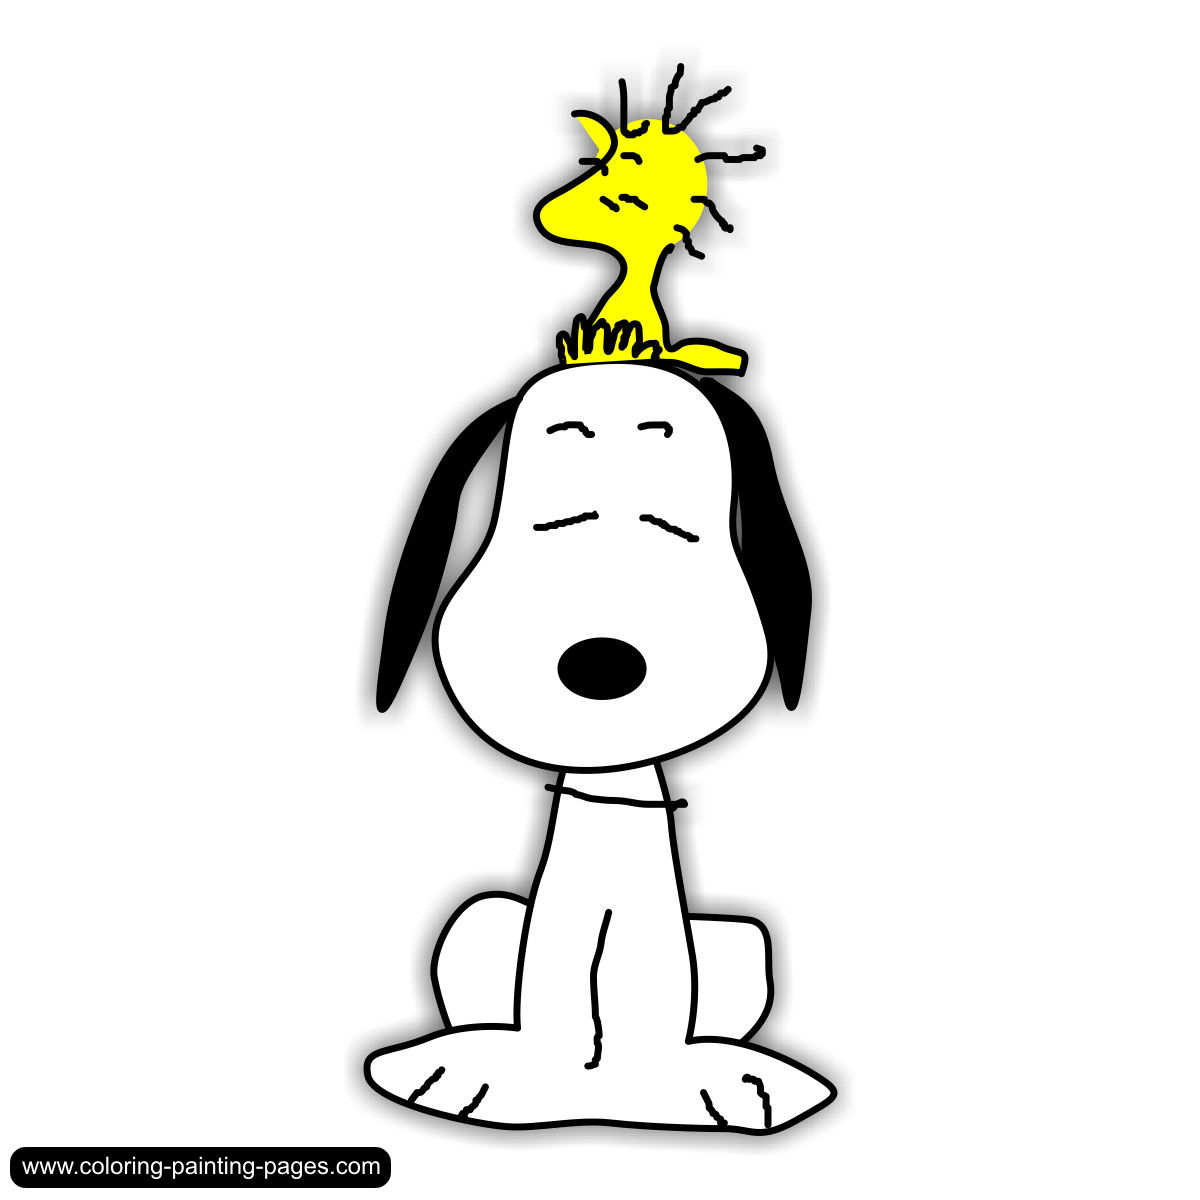 Peanuts Snoopy Woodstock Thanksgiving Clipart   Free Clip Art Images